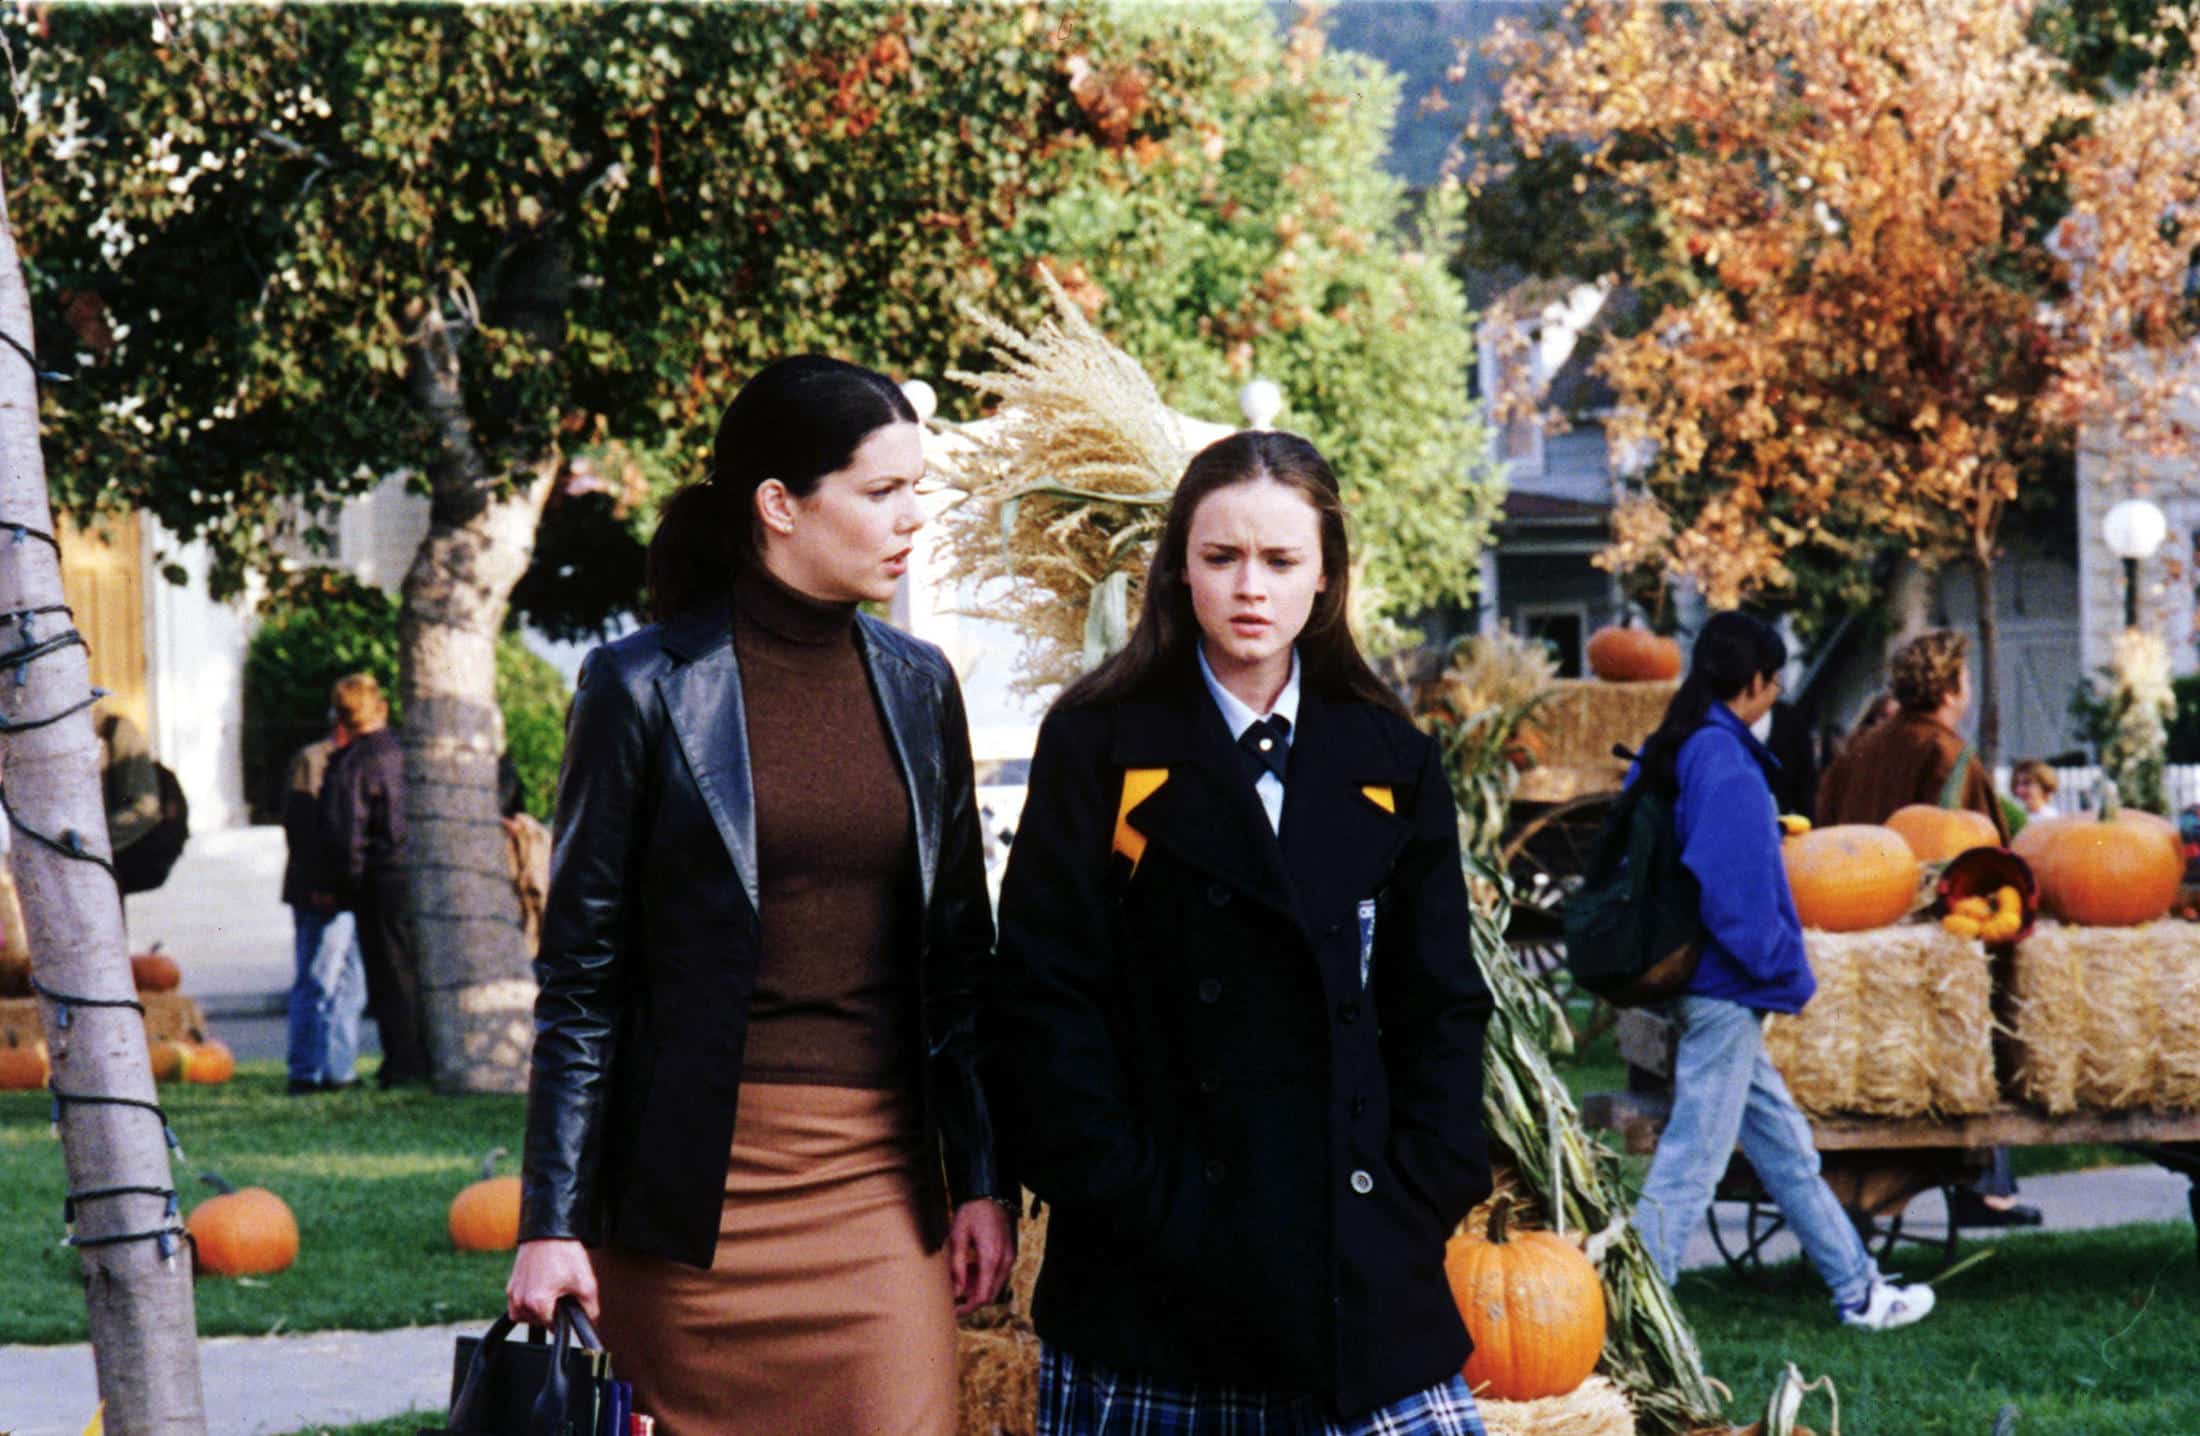 Film Still / Publicity Stills from &#8220;Gilmore Girls&#8221; (Episode: Kiss and Tell) Lauren Graham, Alexis Bledel 2000 Photo Credit: Scott Humbert        File Reference # 30846561THA  For Editorial Use Only &#8211;  All Rights Reserved